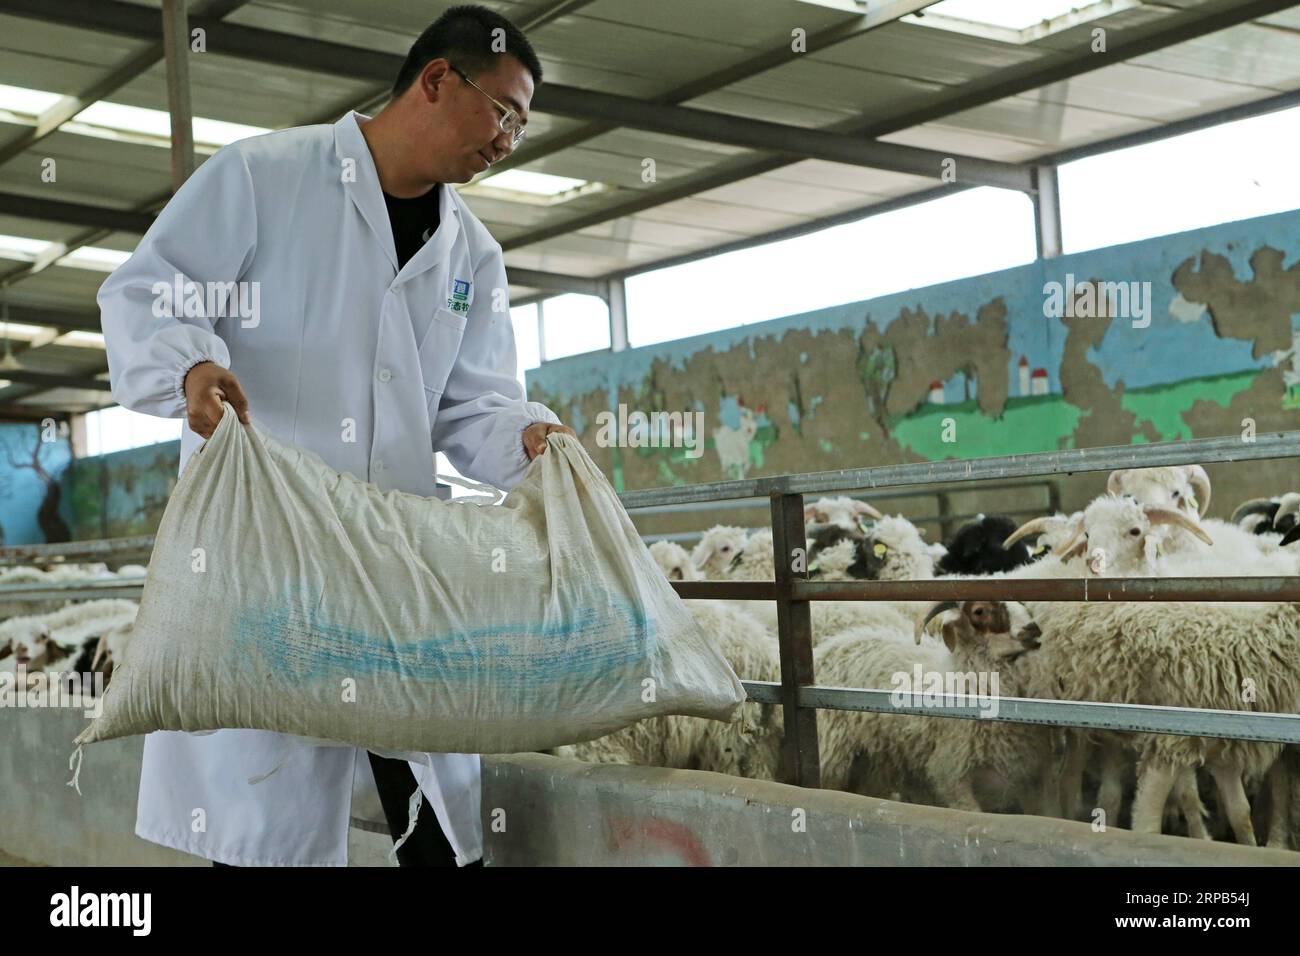 (190528) -- WUZHONG, May 28, 2019 (Xinhua) -- Feng Huan feeds Tan sheep in Ningxin ecological ranch in Yanchi County of Ningxia Hui Autonomous Region, May 27, 2019. Feng Huan, born in 1990, grew up in Yanchi County of Ningxia, where the mutton of Tan sheep is known for its fine taste and rich nutrition. Graduated from the Ningxia University in 2012, Feng worked in Beijing for several years with a stable income. He returned to his hometown in October of 2015 to take care of his families. By providing technical advices, Feng joined the Ningxin ecological ranch and began to raise Tan sheep therea Stock Photo